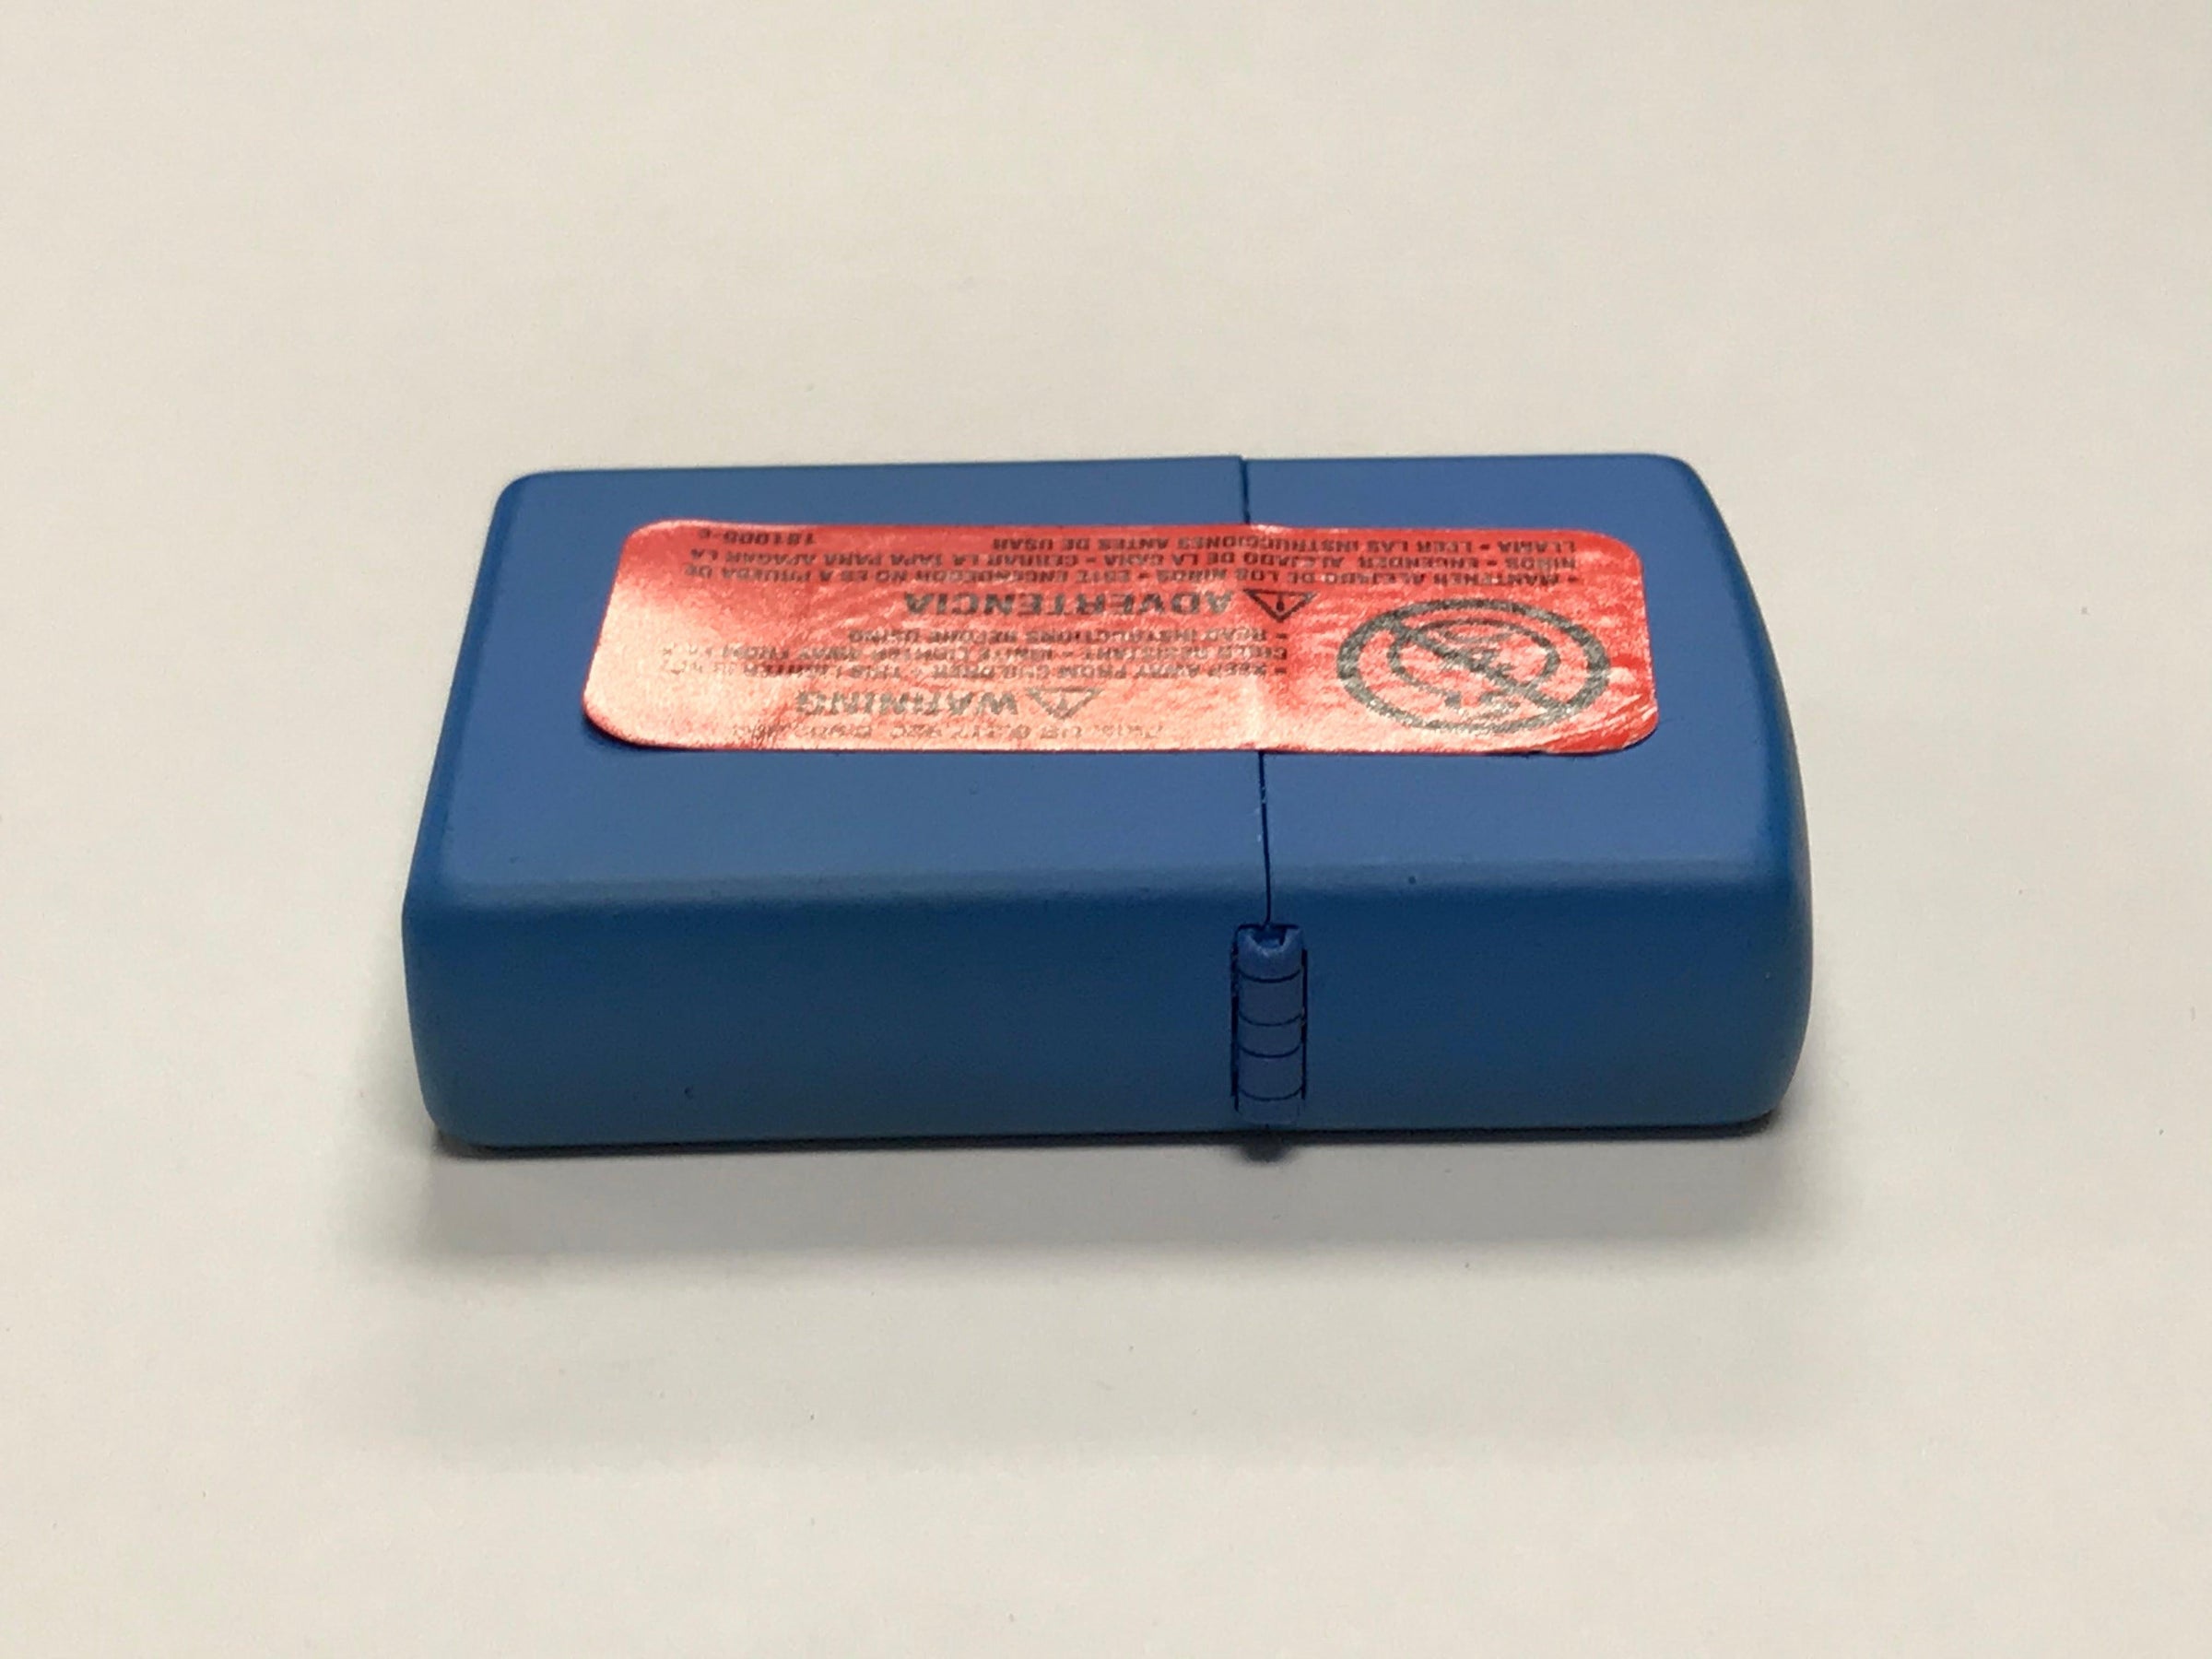 New 2007 Royal Blue Matte Zippo Lighter - Hers and His Treasures